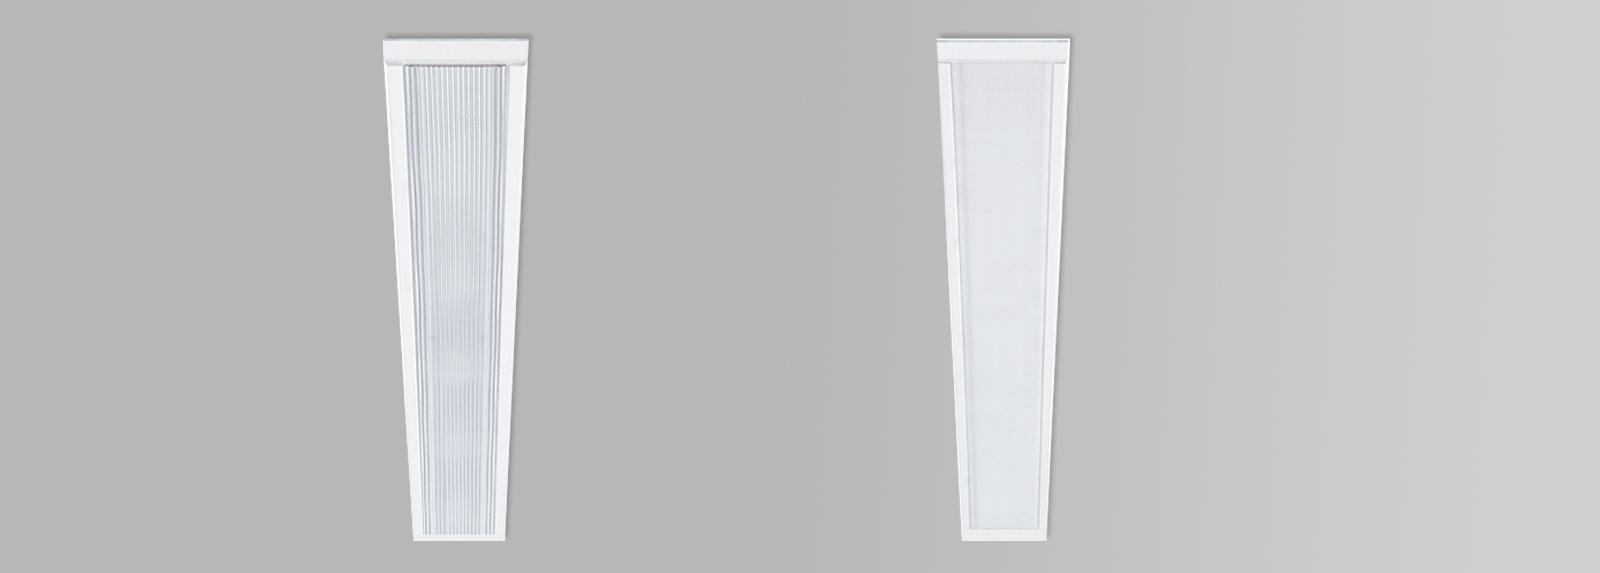 RAINA 100 | Downlights lineales empotrables